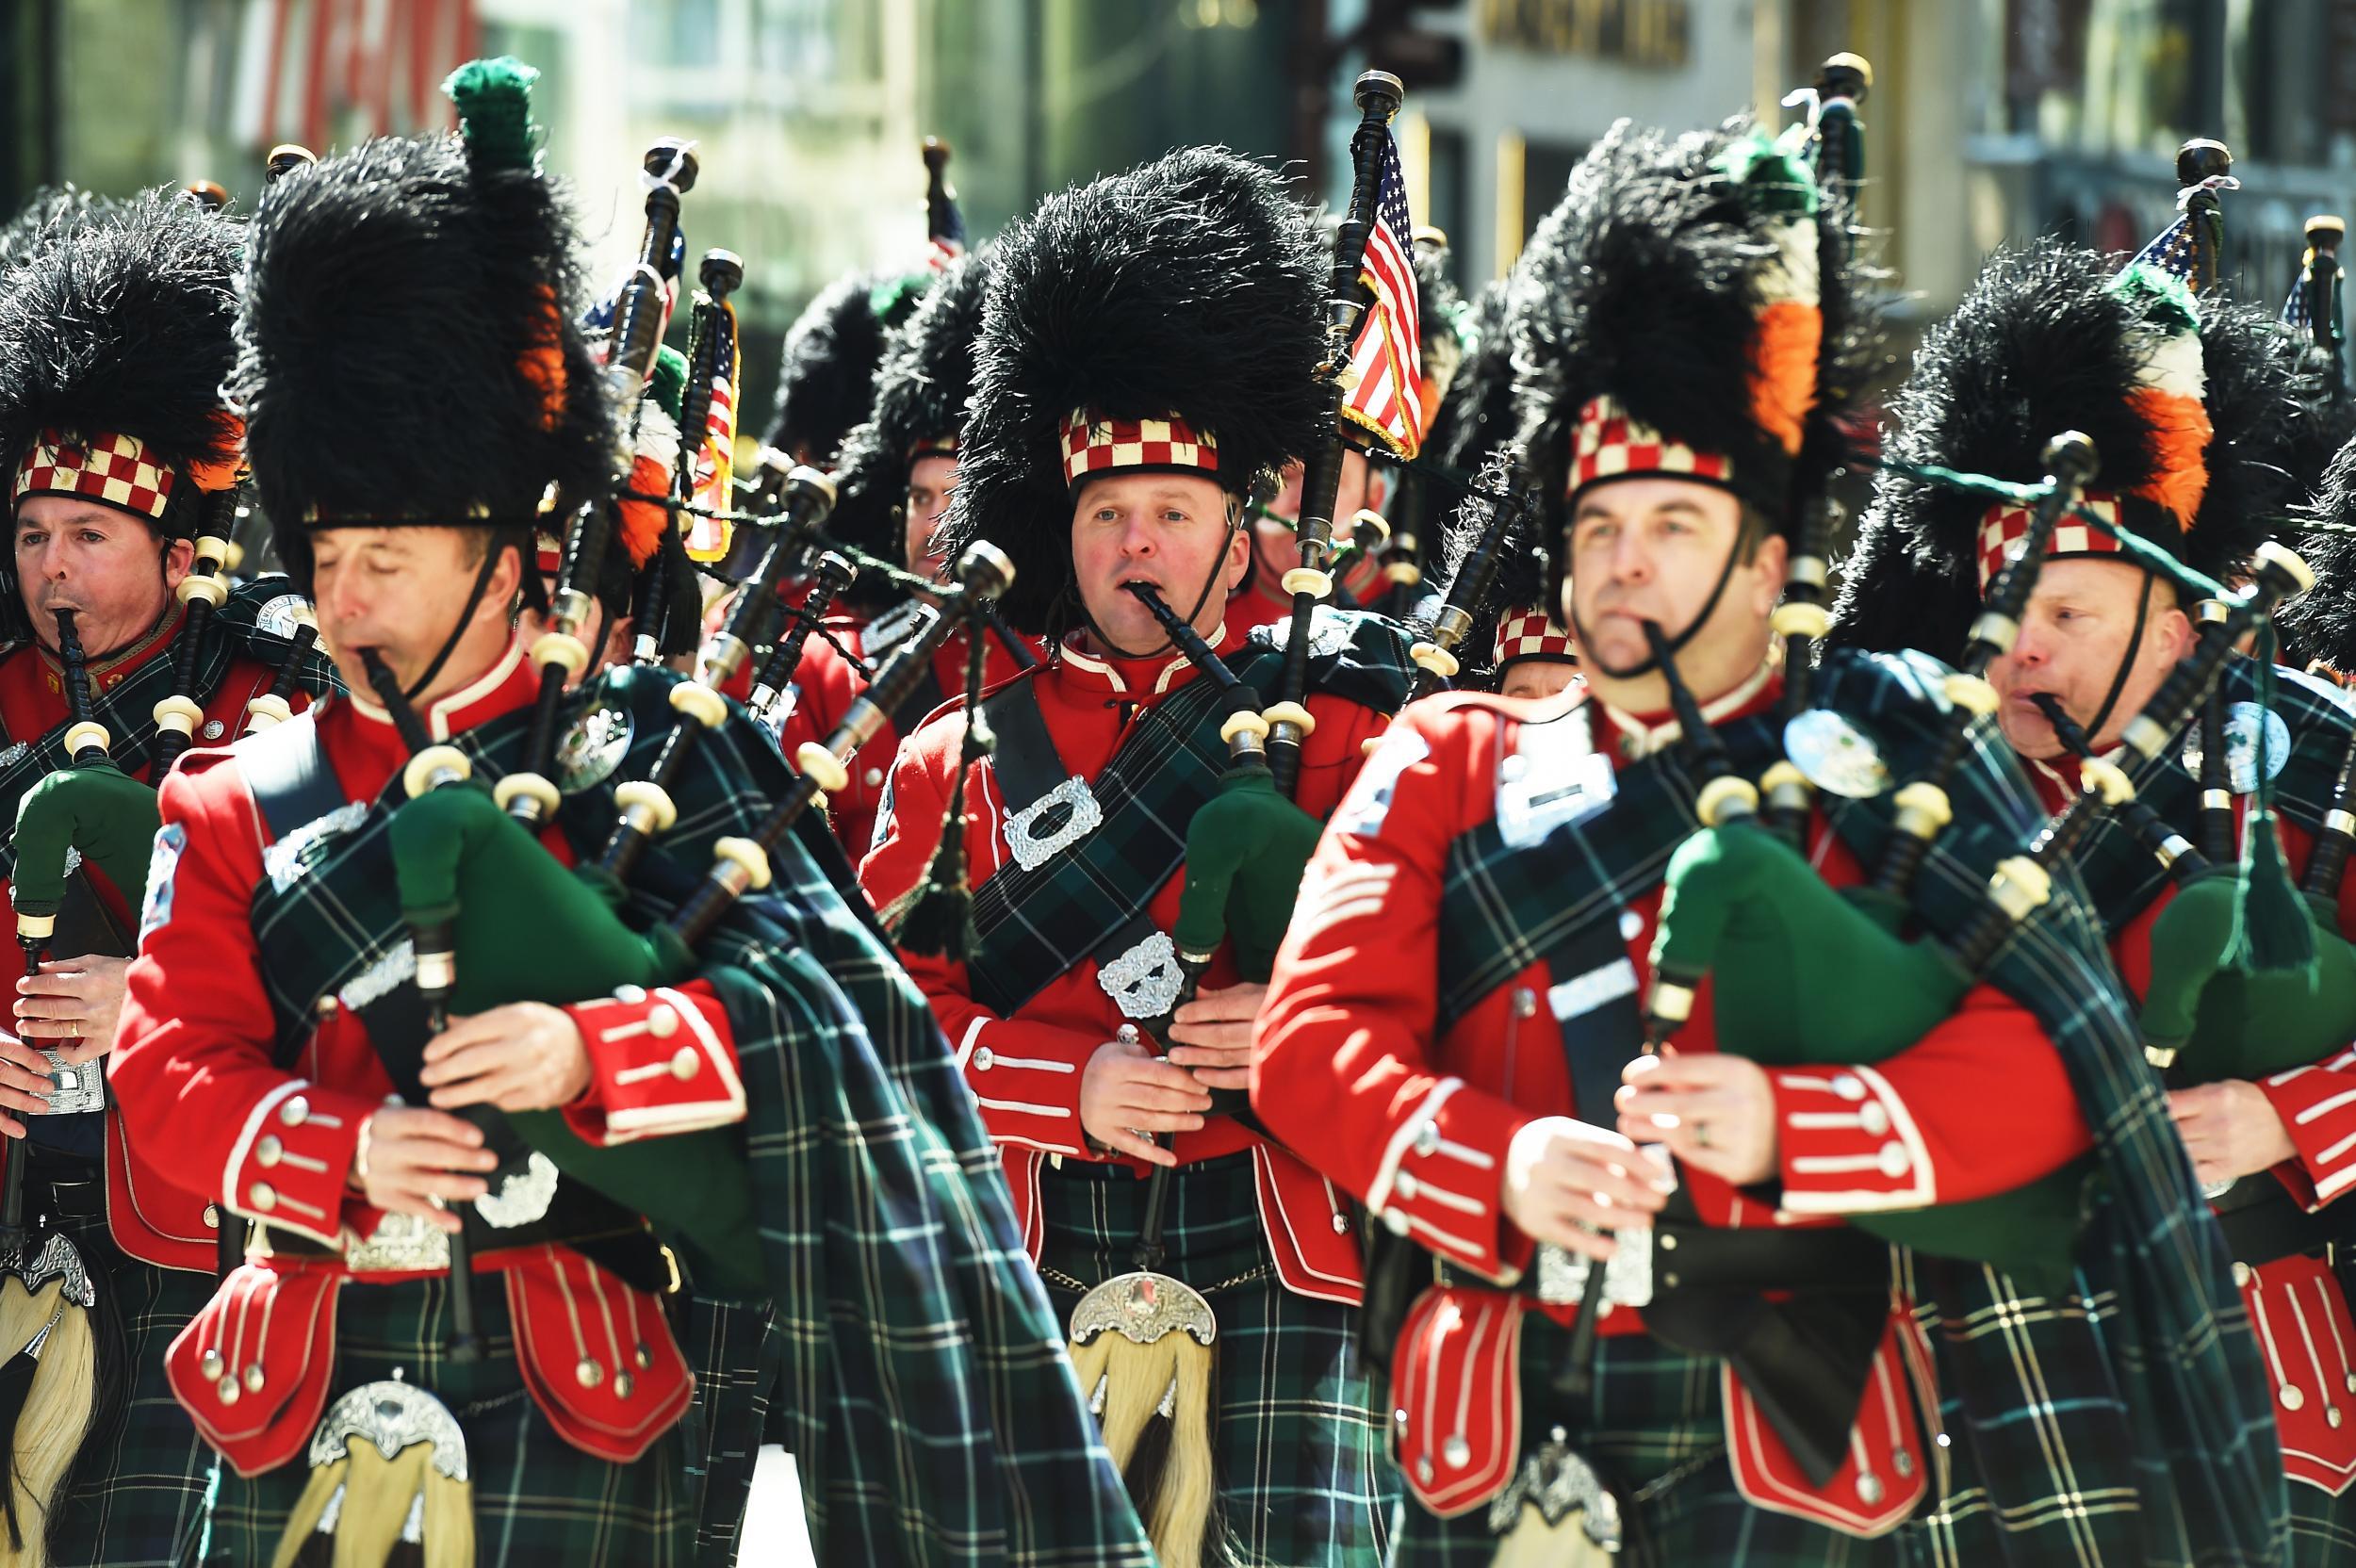 St Patrick's Day parade in New York City (Getty)